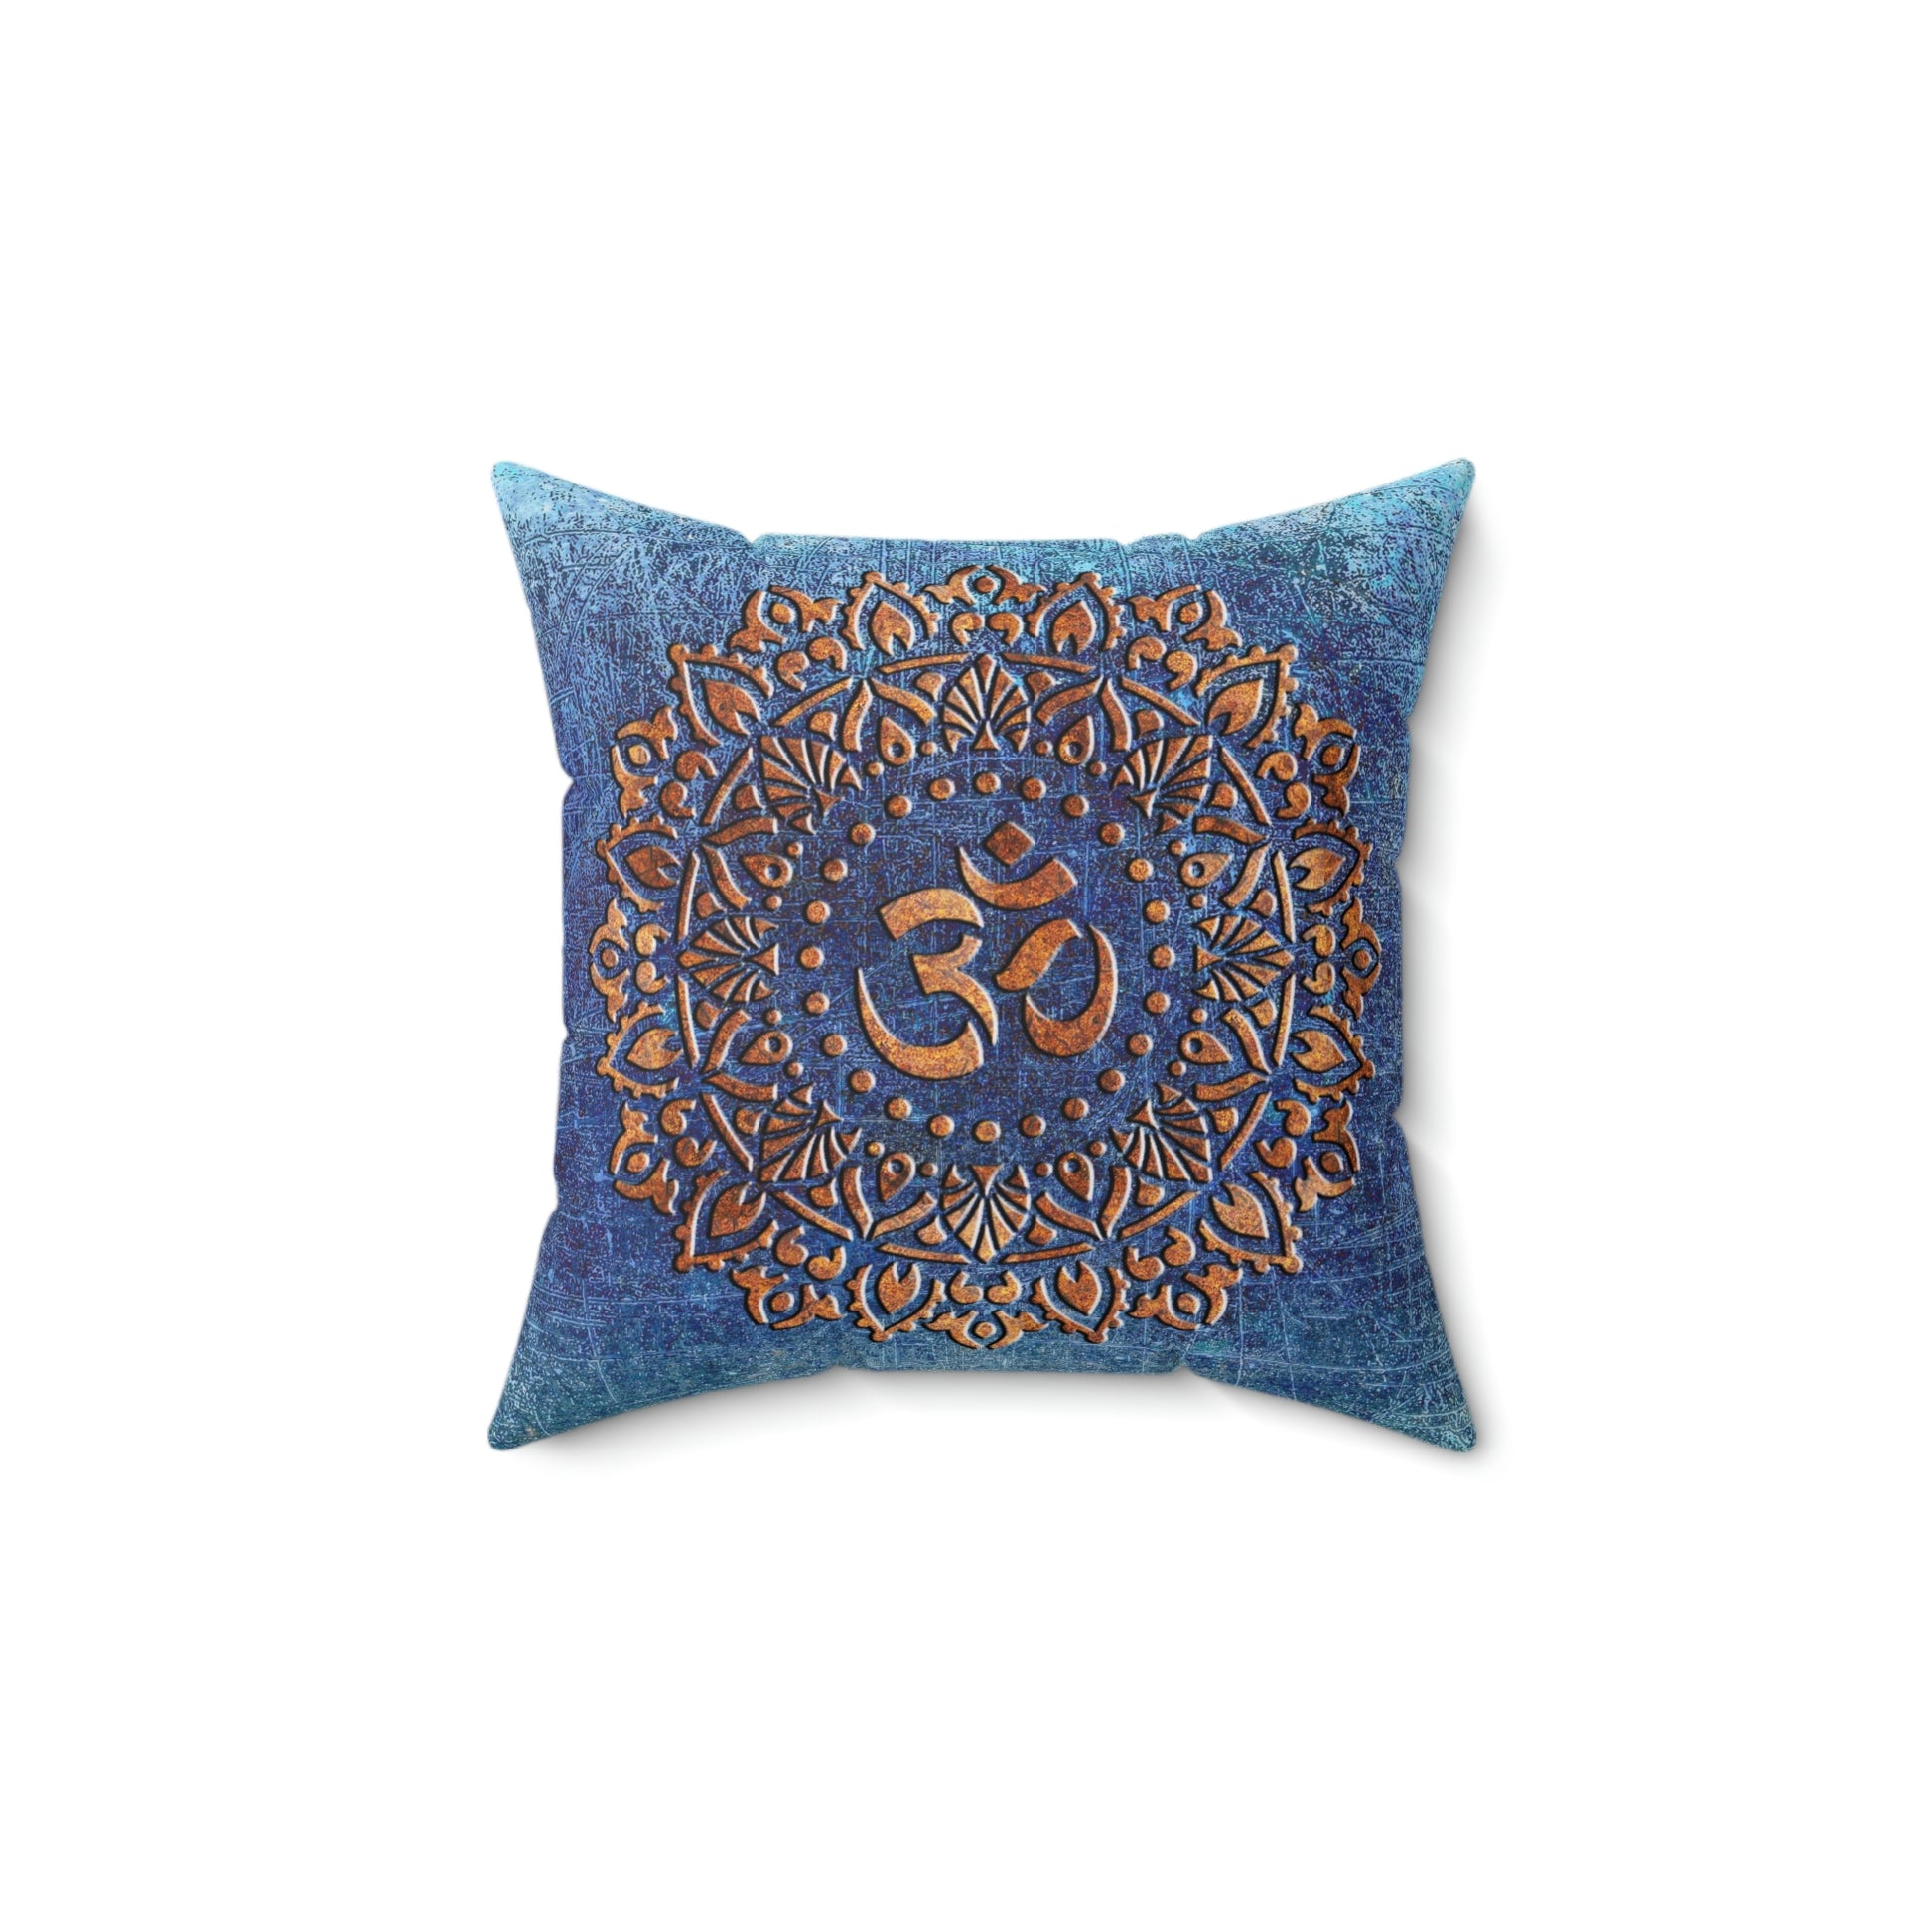 Copper Color Ohm Symbol Mandala Style Print on Distressed Blue Background Square Pillow front view